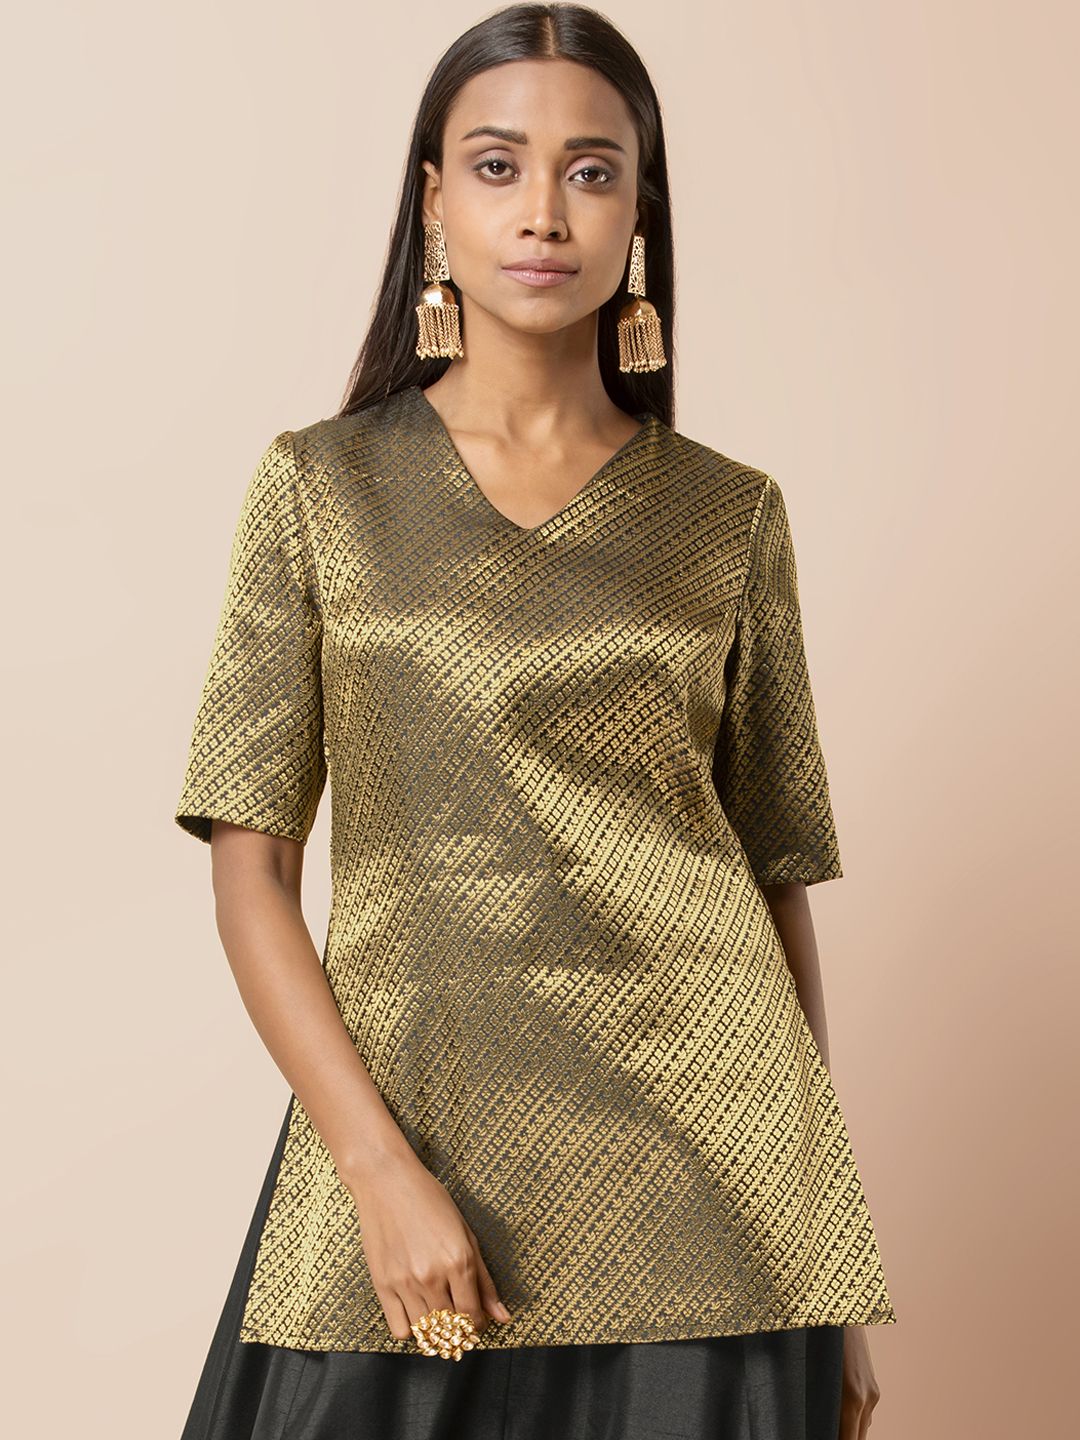 INDYA Women Black & Gold-Toned Woven Design A-Line Kurti Price in India